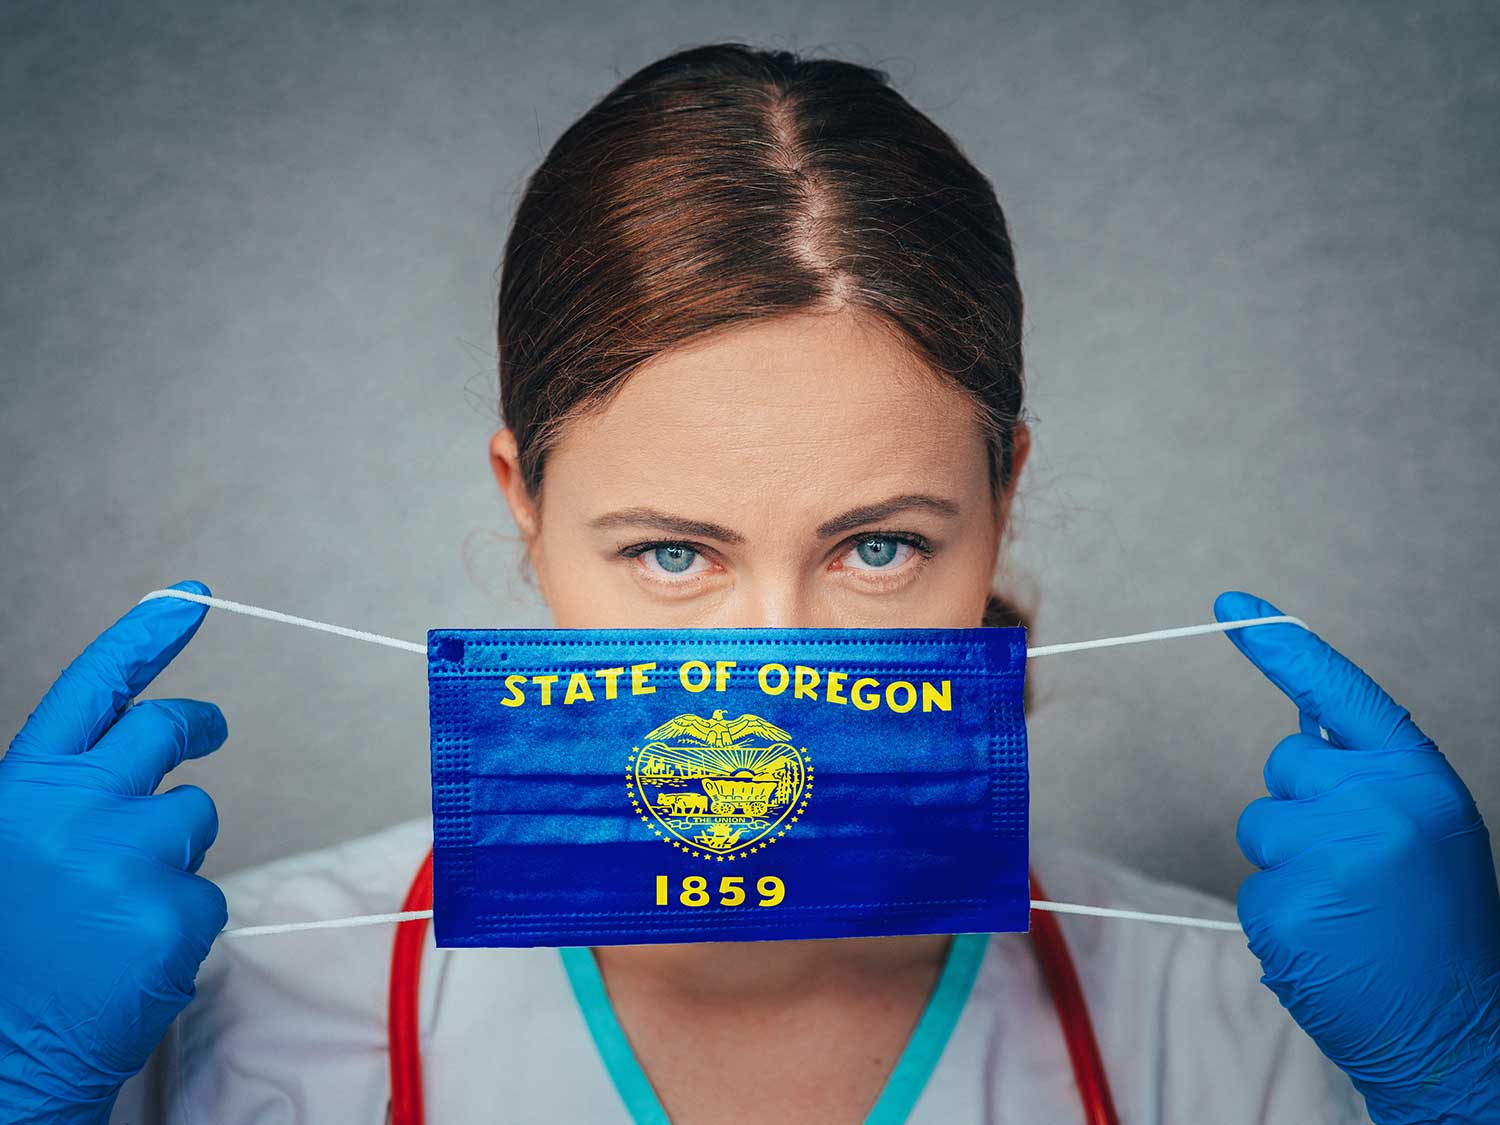 A Female Physician With Medical Malpractice Insurance Holding A Oregon State Flag Surgical Mask Over Her Face